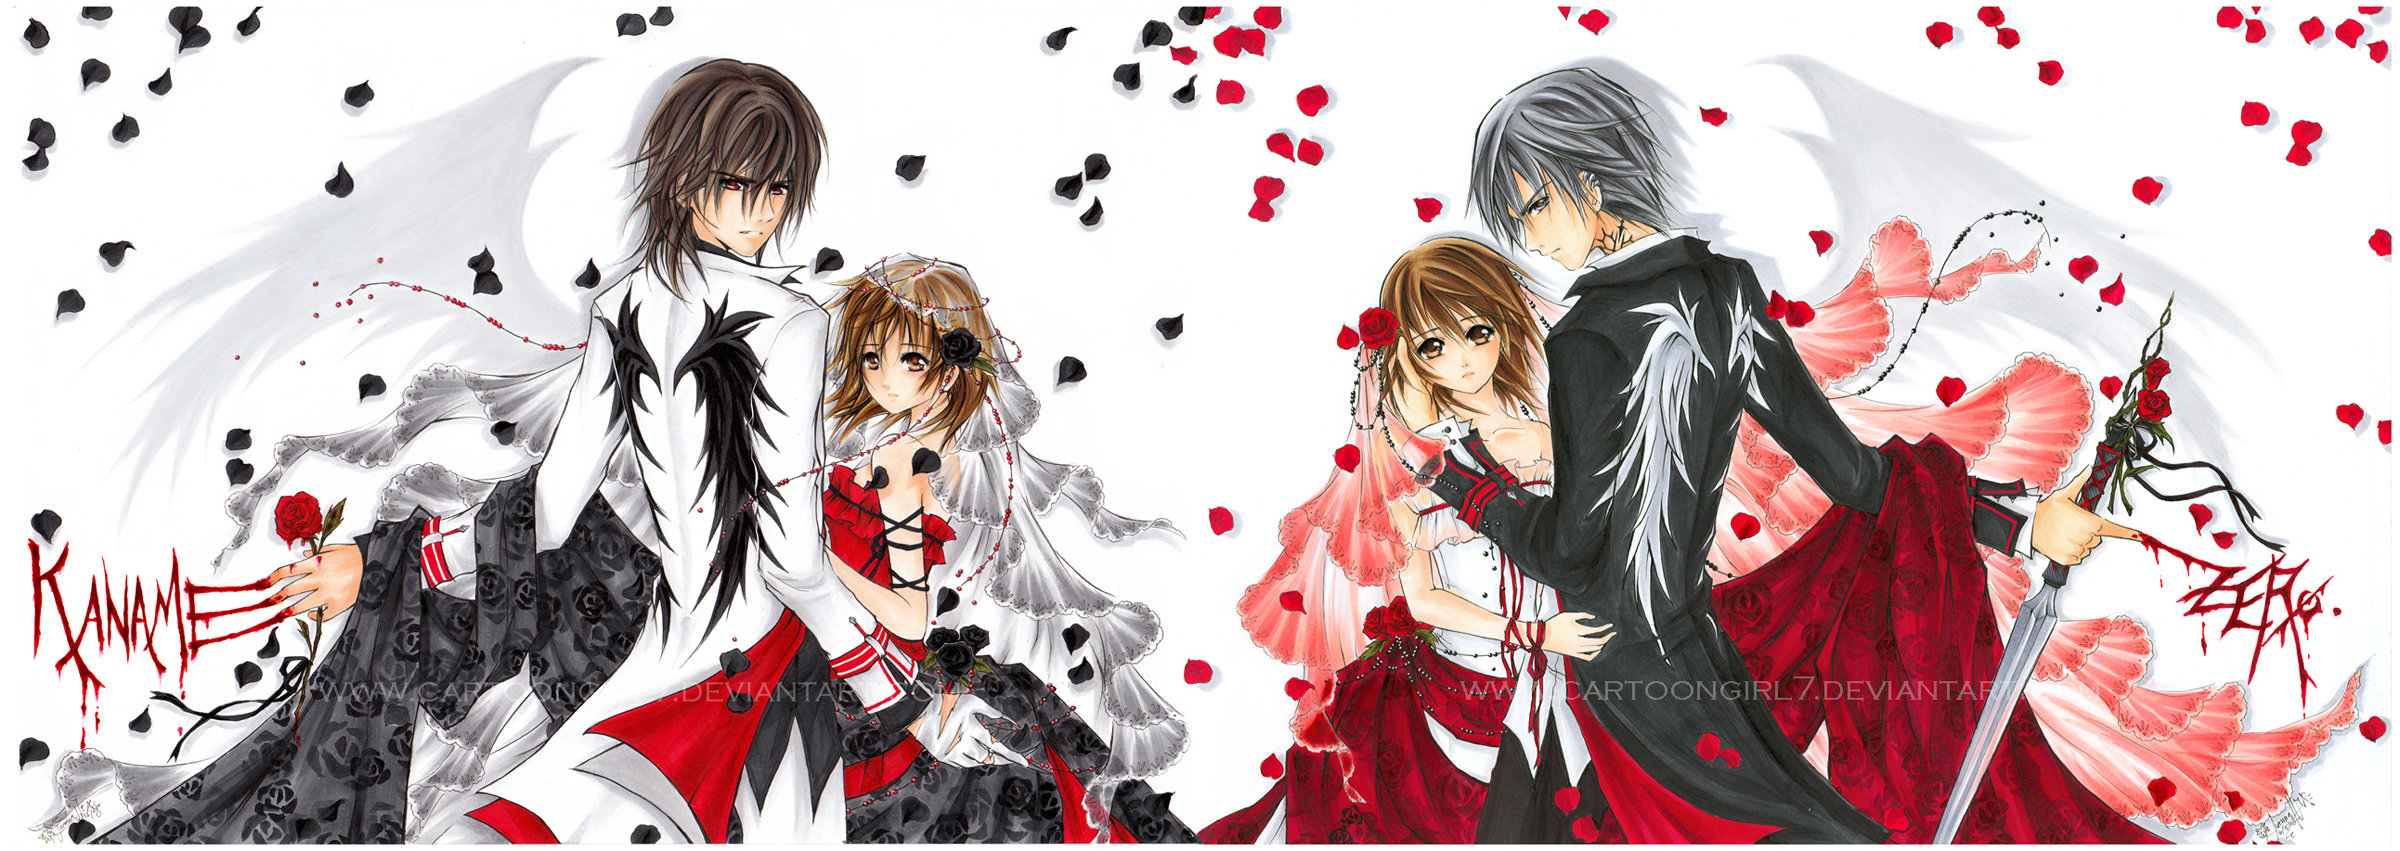 Vampire Knight Backgrounds, Compatible - PC, Mobile, Gadgets| 2400x851 px